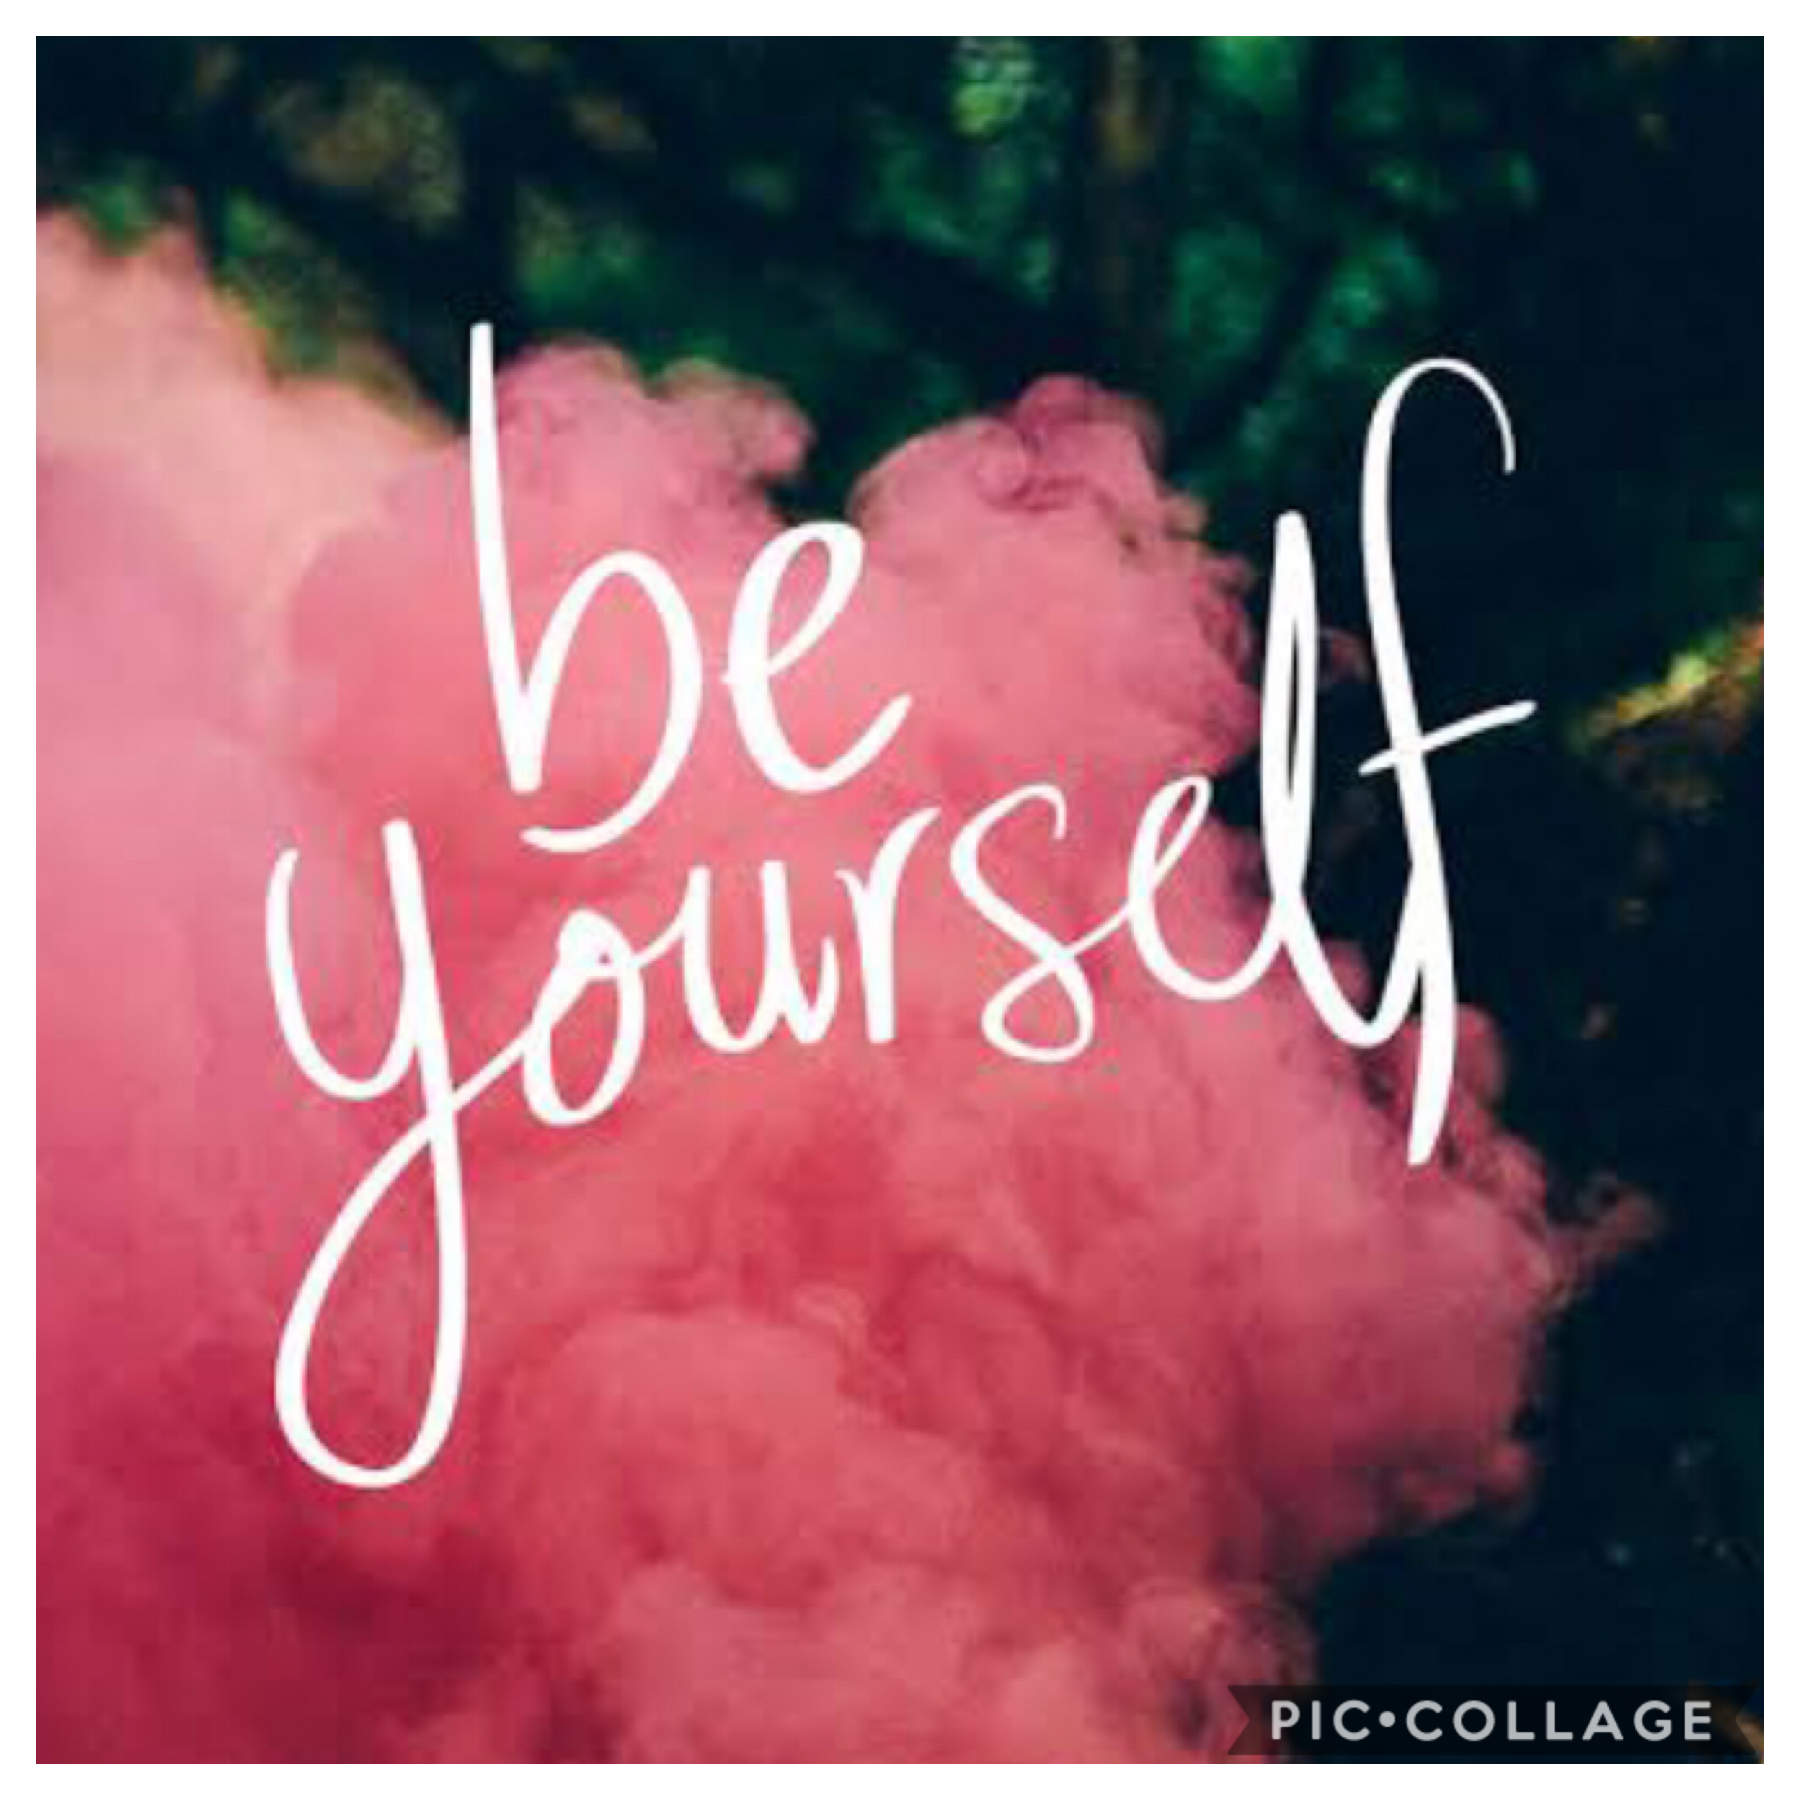 Just be yourself 😊
